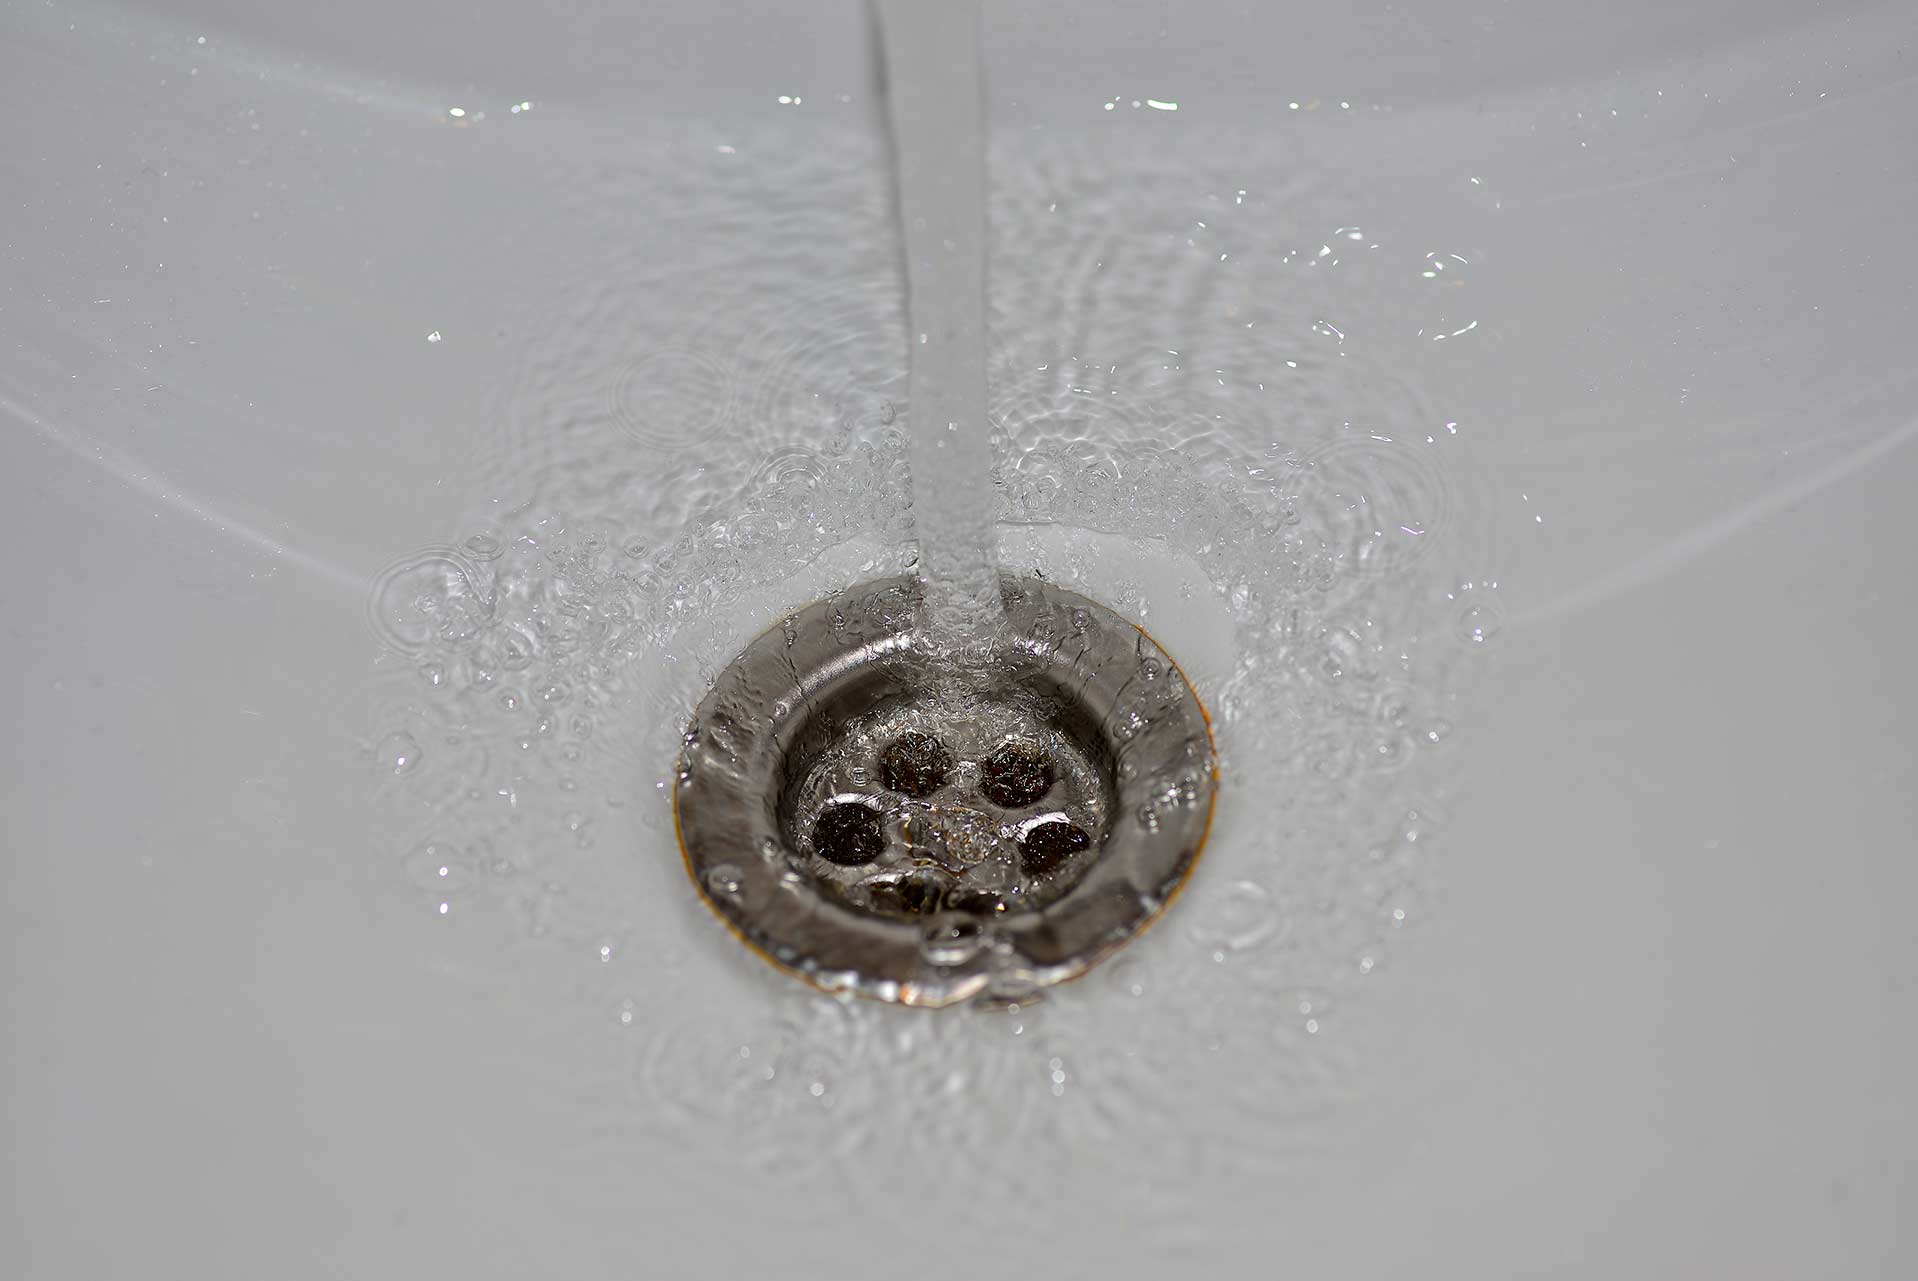 A2B Drains provides services to unblock blocked sinks and drains for properties in Saffron Walden.